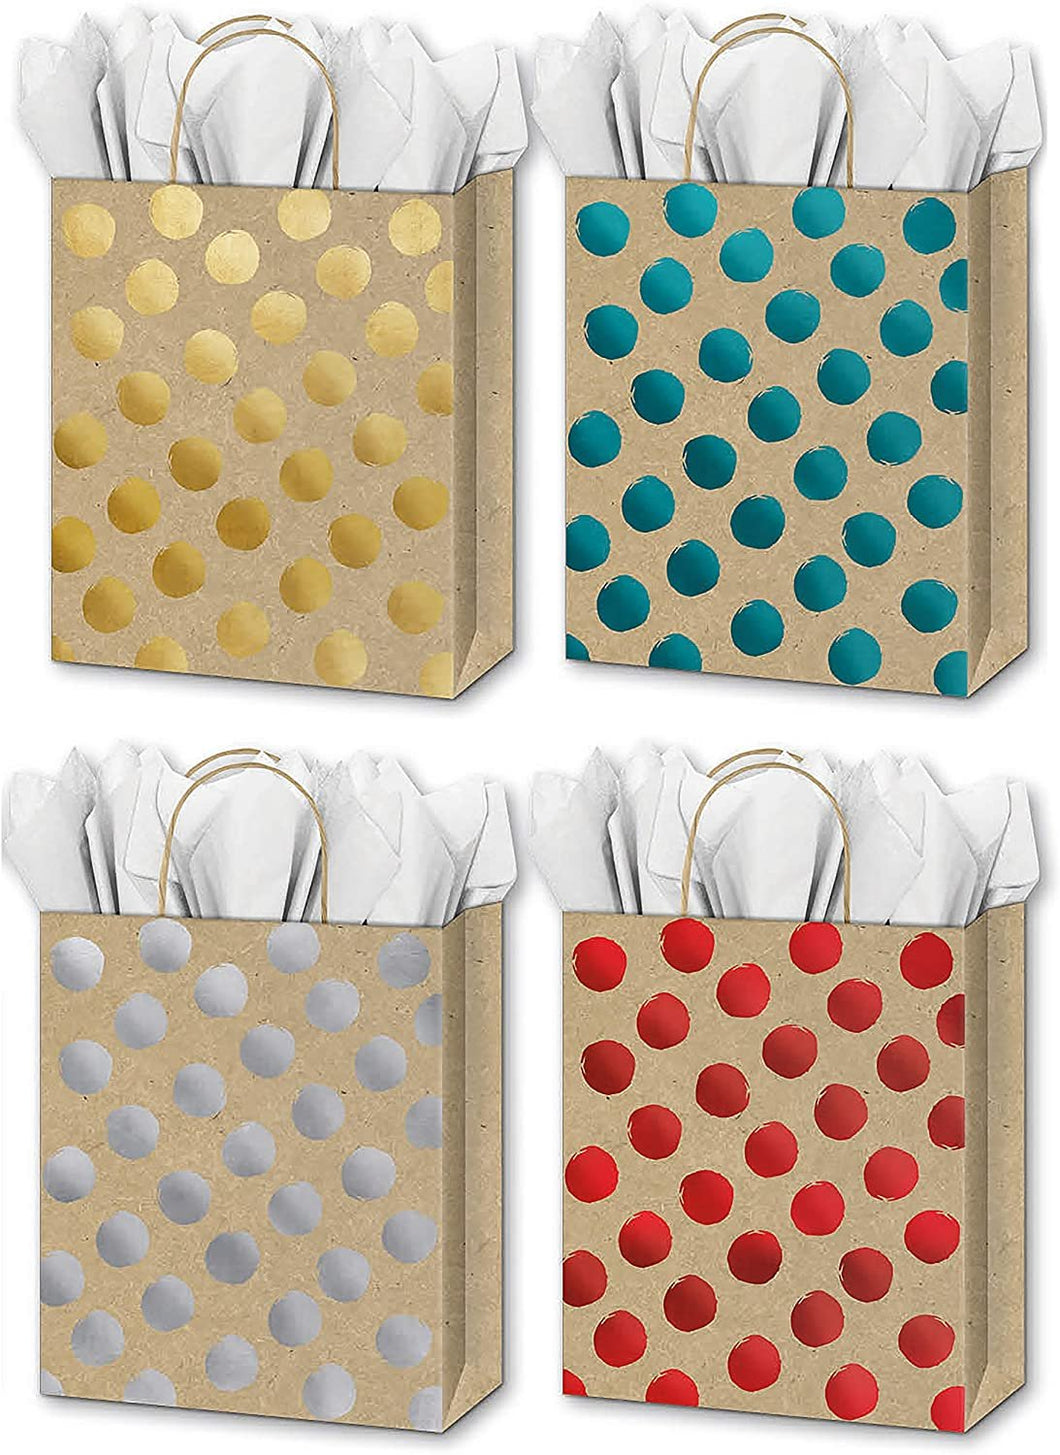 B-THERE Bundle of 4 Everyday Kraft Large Solid Color Gift Bags W/Foil Polka Dots, Tissue Paper, Jute Handles